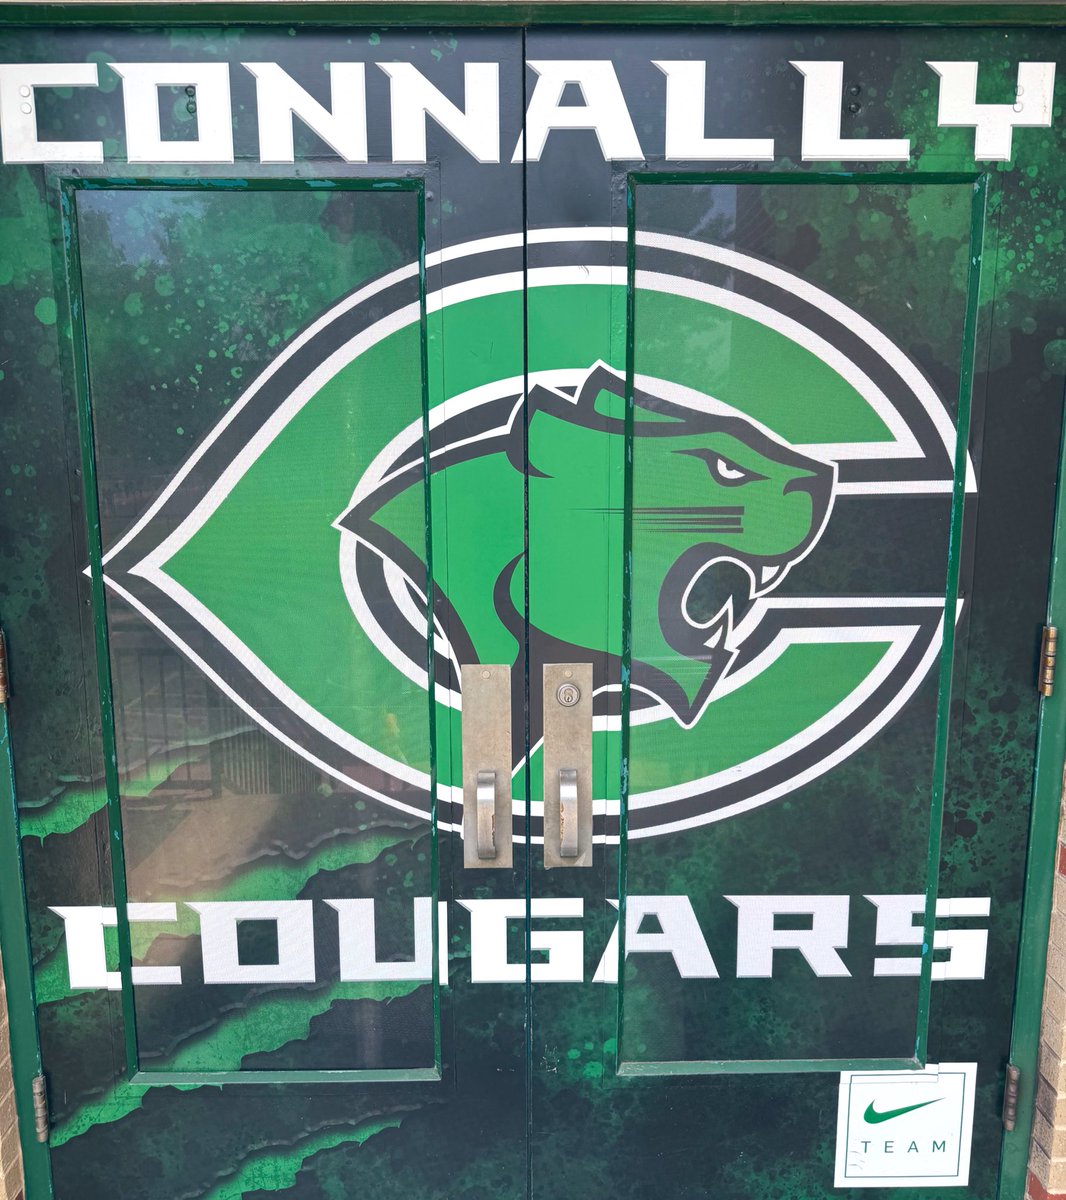 Thank you @CoachCBurton & Coach Schuyler Anderson for taking the time to talk with me! 
@ConnallyFb

COUGARS ---> BULLDOGS 

#TooLiveU | #PupsUp